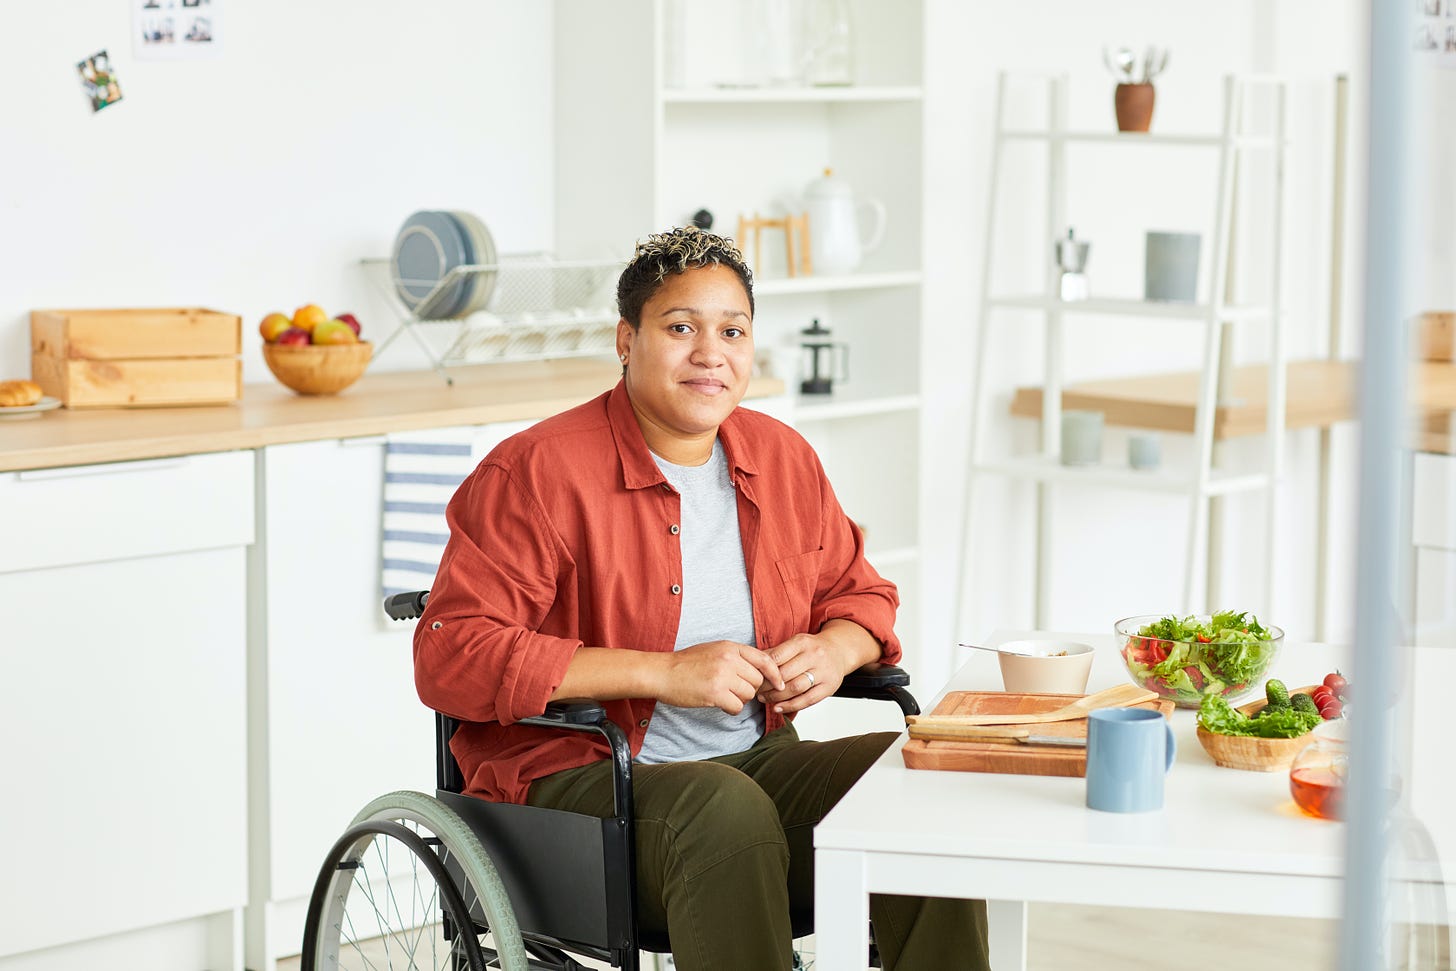 A person of color sits in a manual wheelchair in a kitchen.